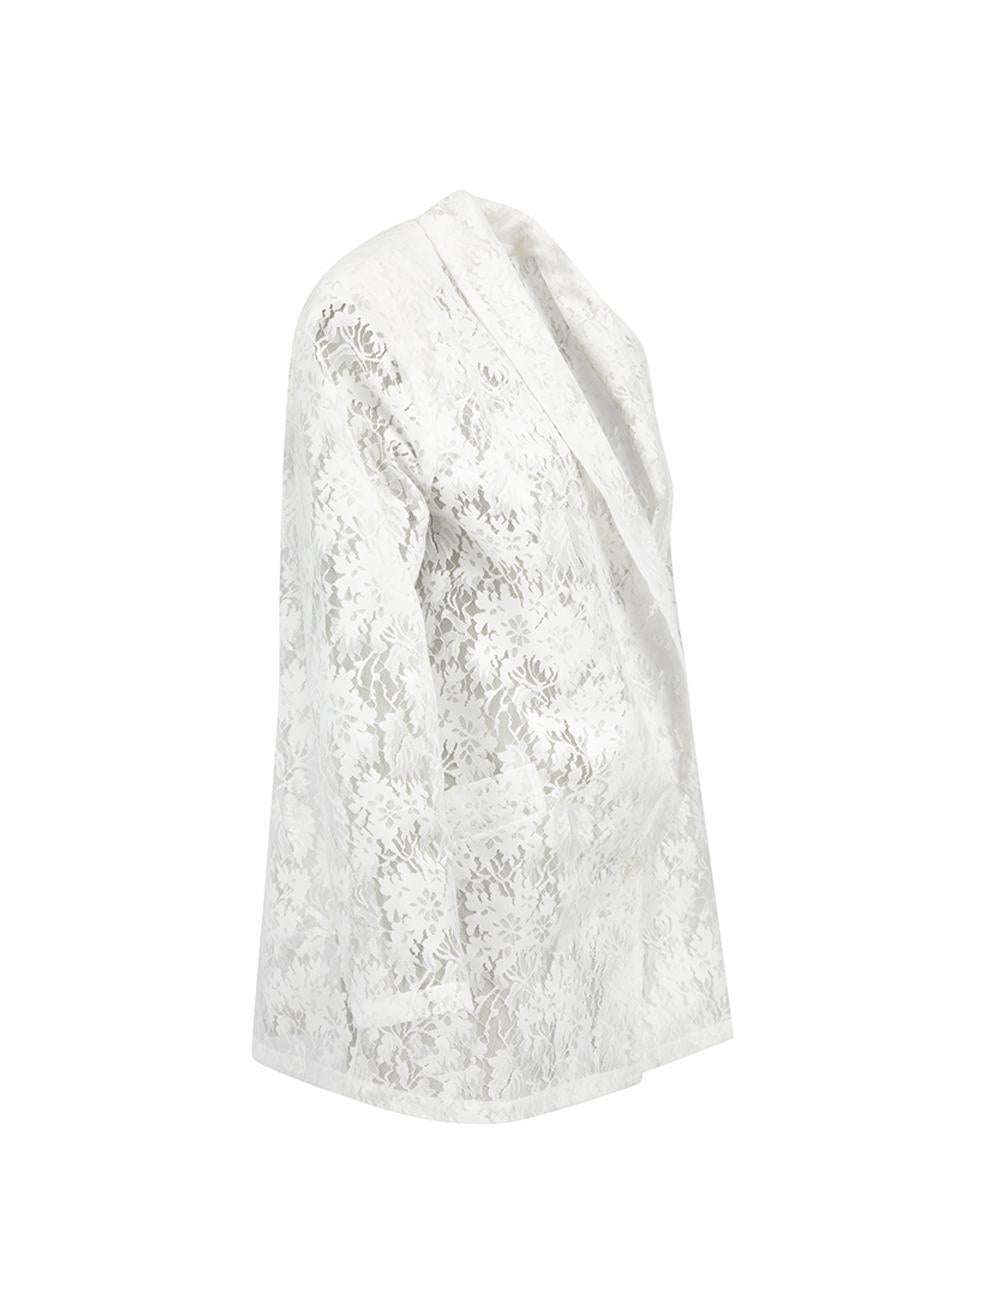 CONDITION is Never worn, with tags. No visible wear to jacket is evident on this new Philosophy di Lorenzo Serafini designer resale item.
  
  Details
  White
  Polyester
  Blazer jacket
  Oversized fit
  Floral lace
  Sheer
  Long sleeves
  Button